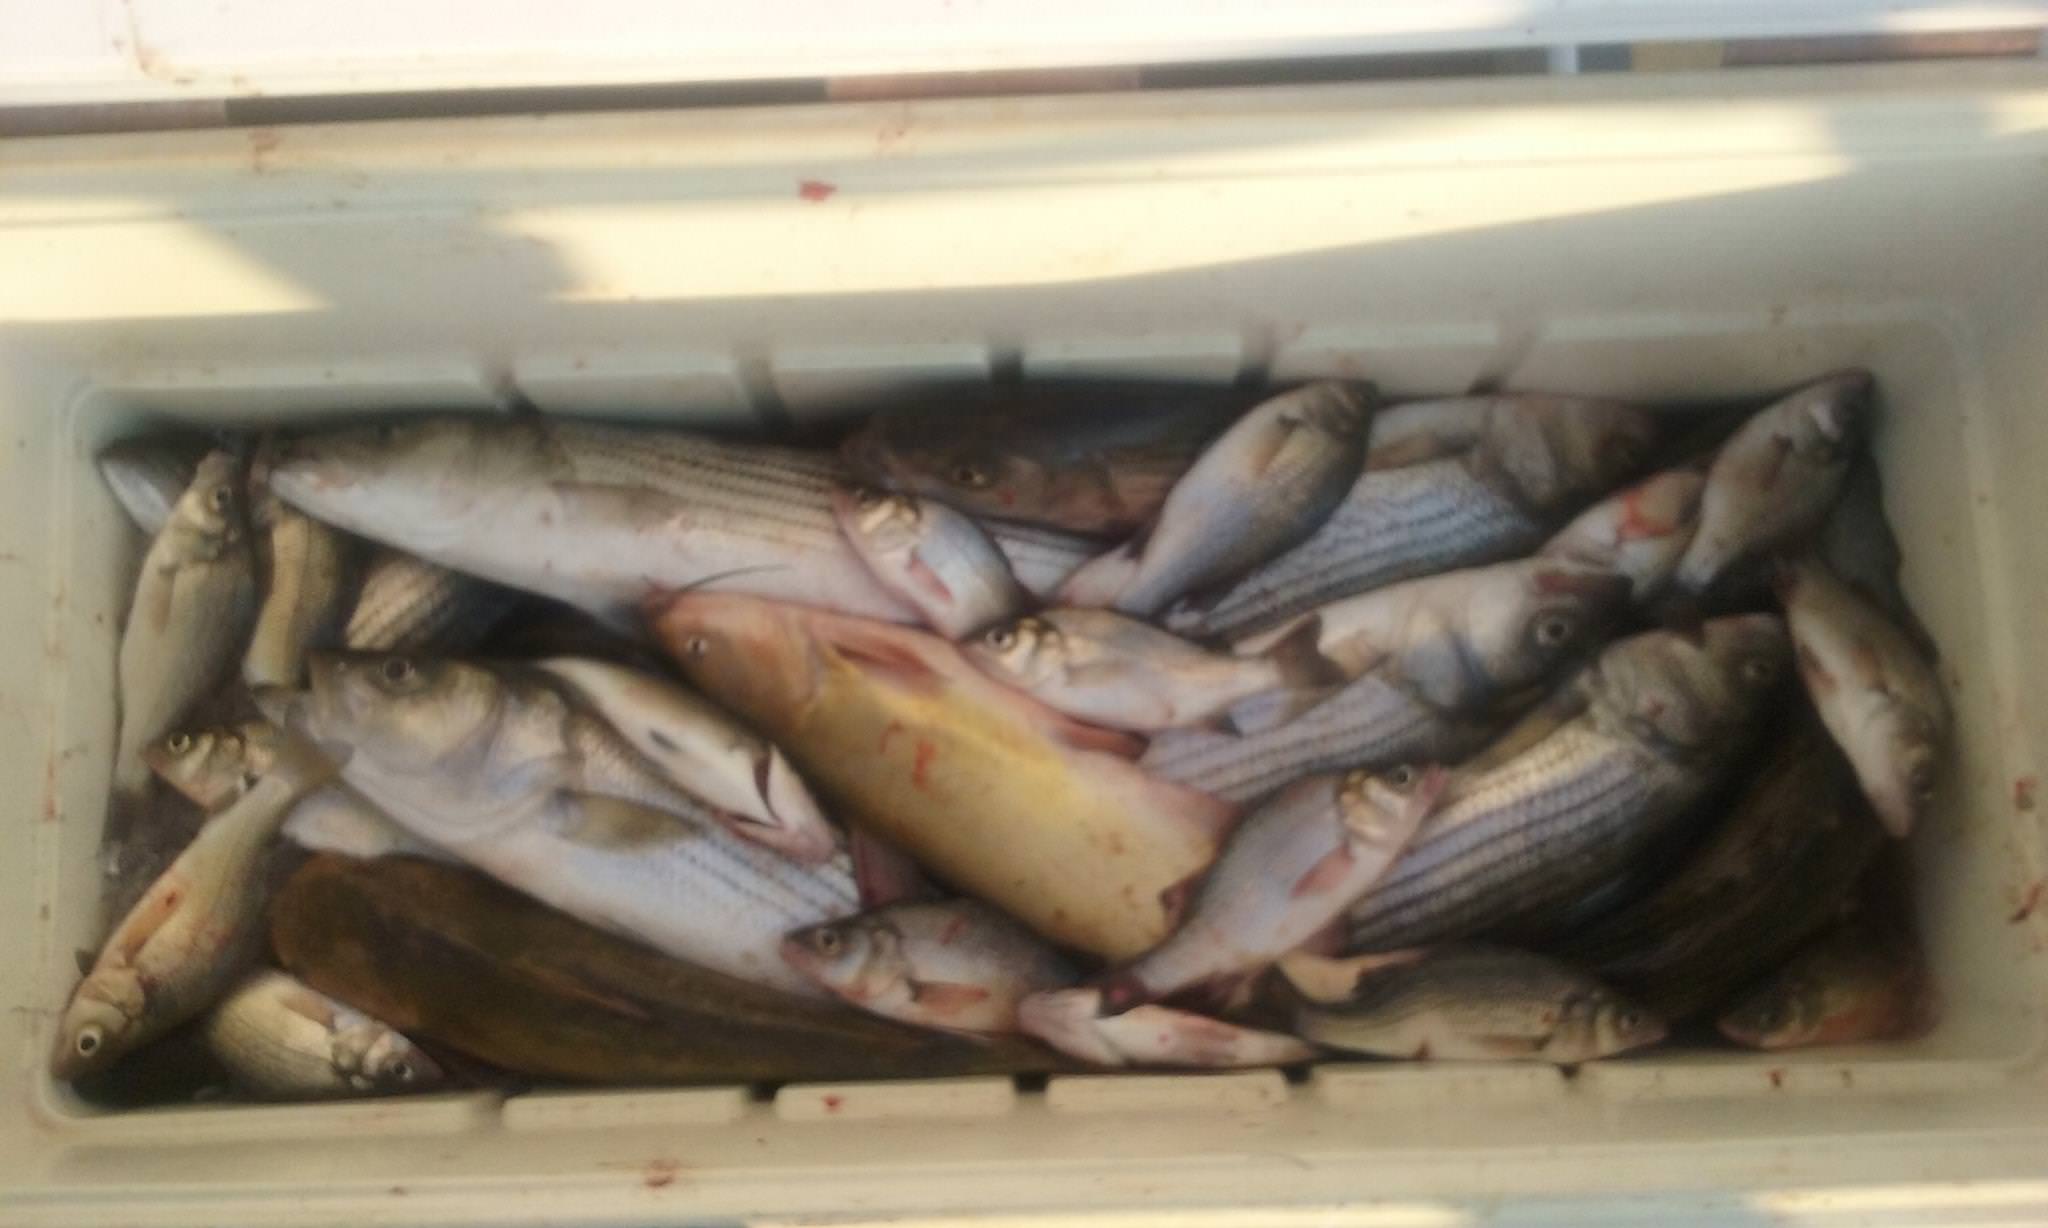 Rockfish, White Perch, and even some Catfish!